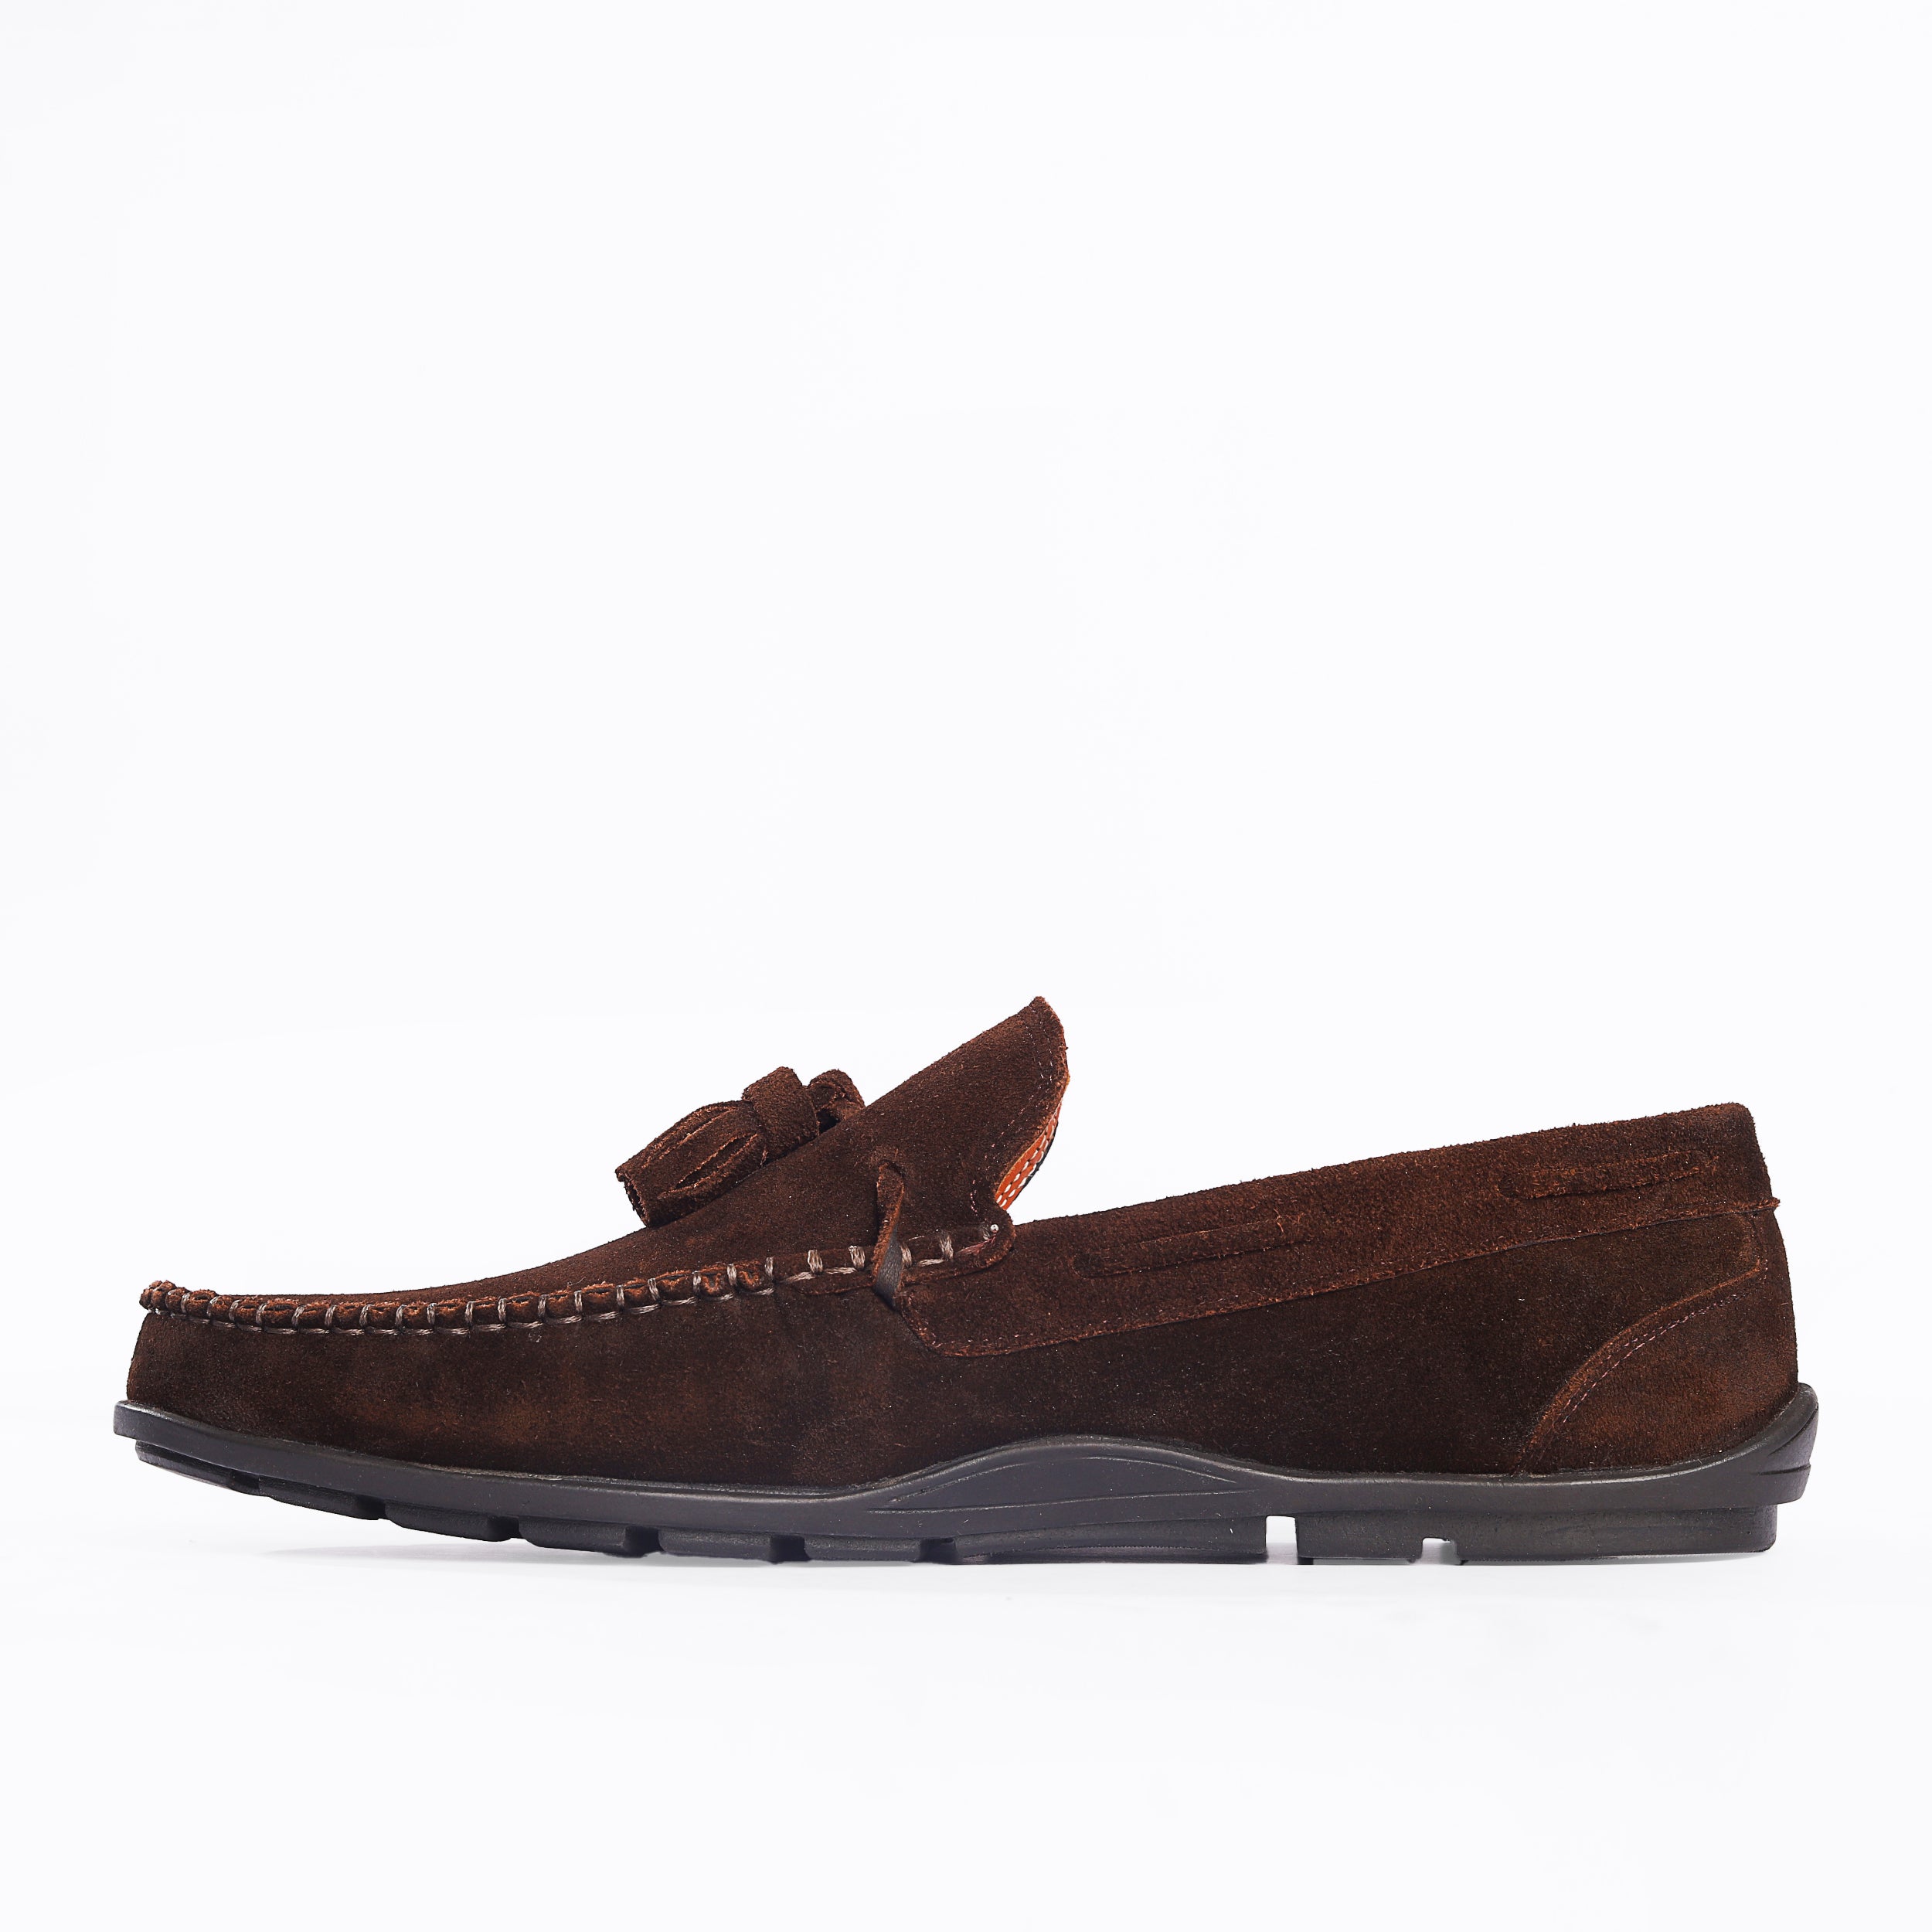 Cavallo Loafers Shoes M18